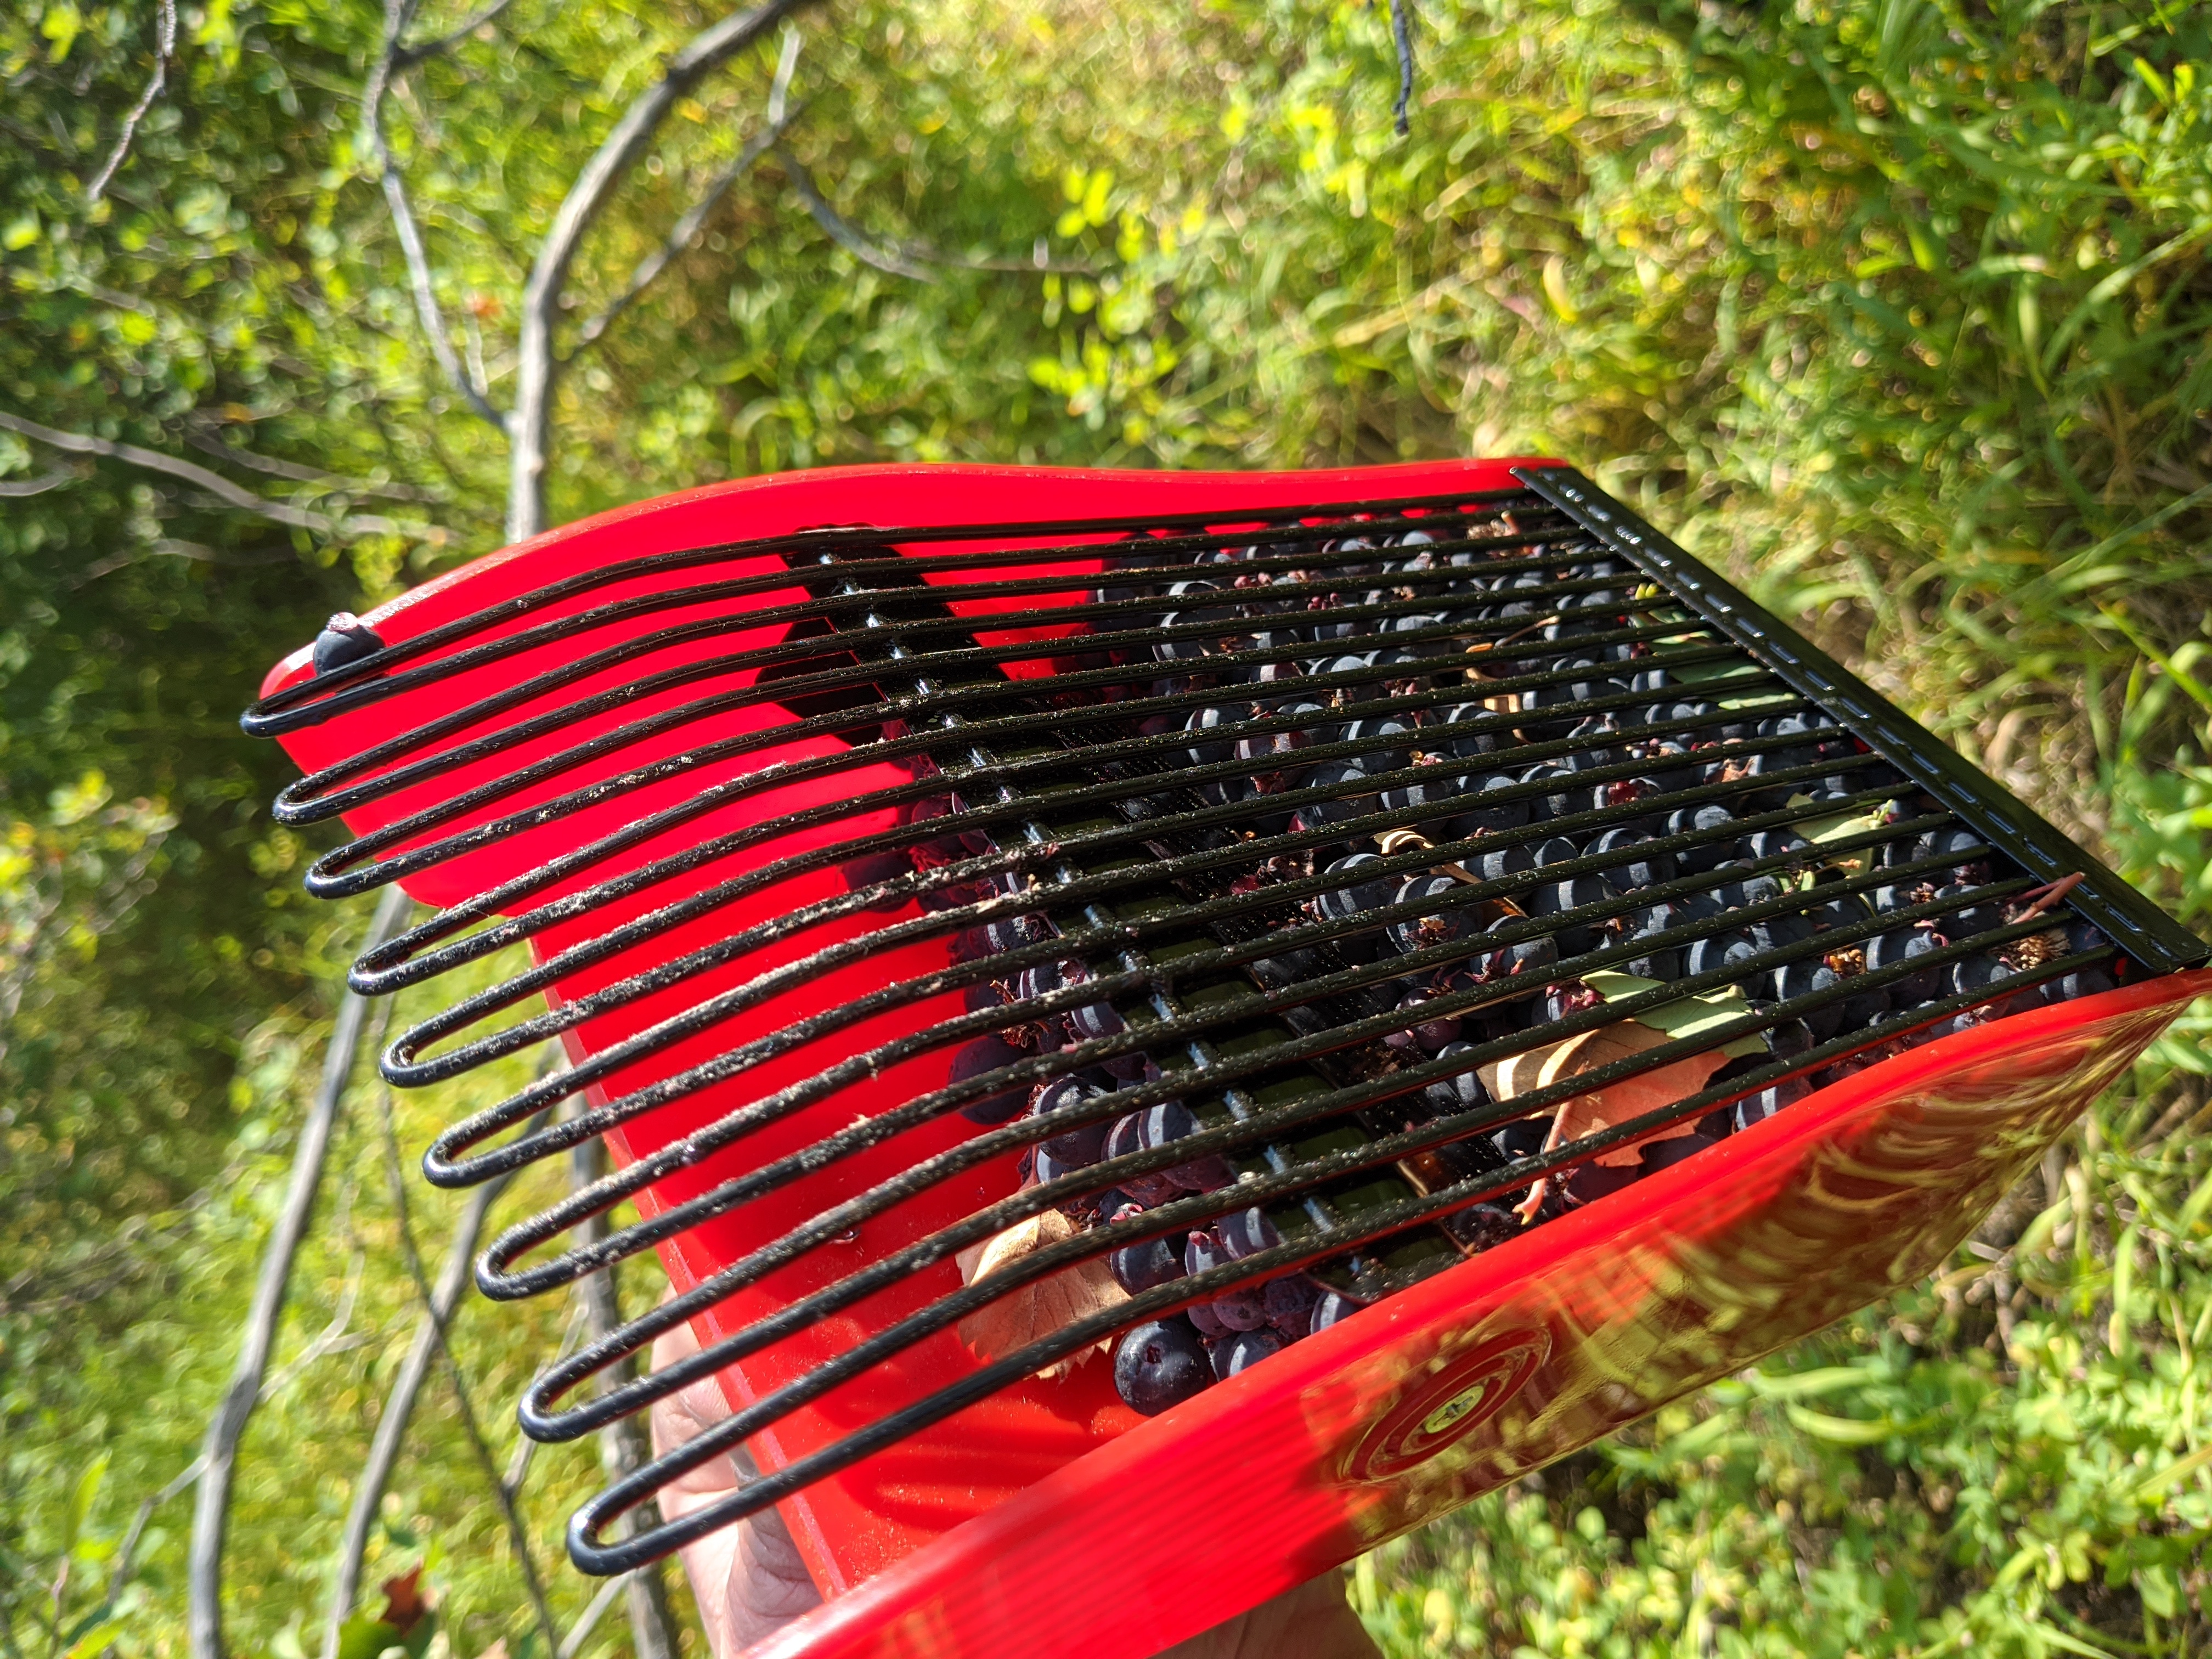 Serviceberries in my berry picker, a thick film of sticky juice coating the fingers.